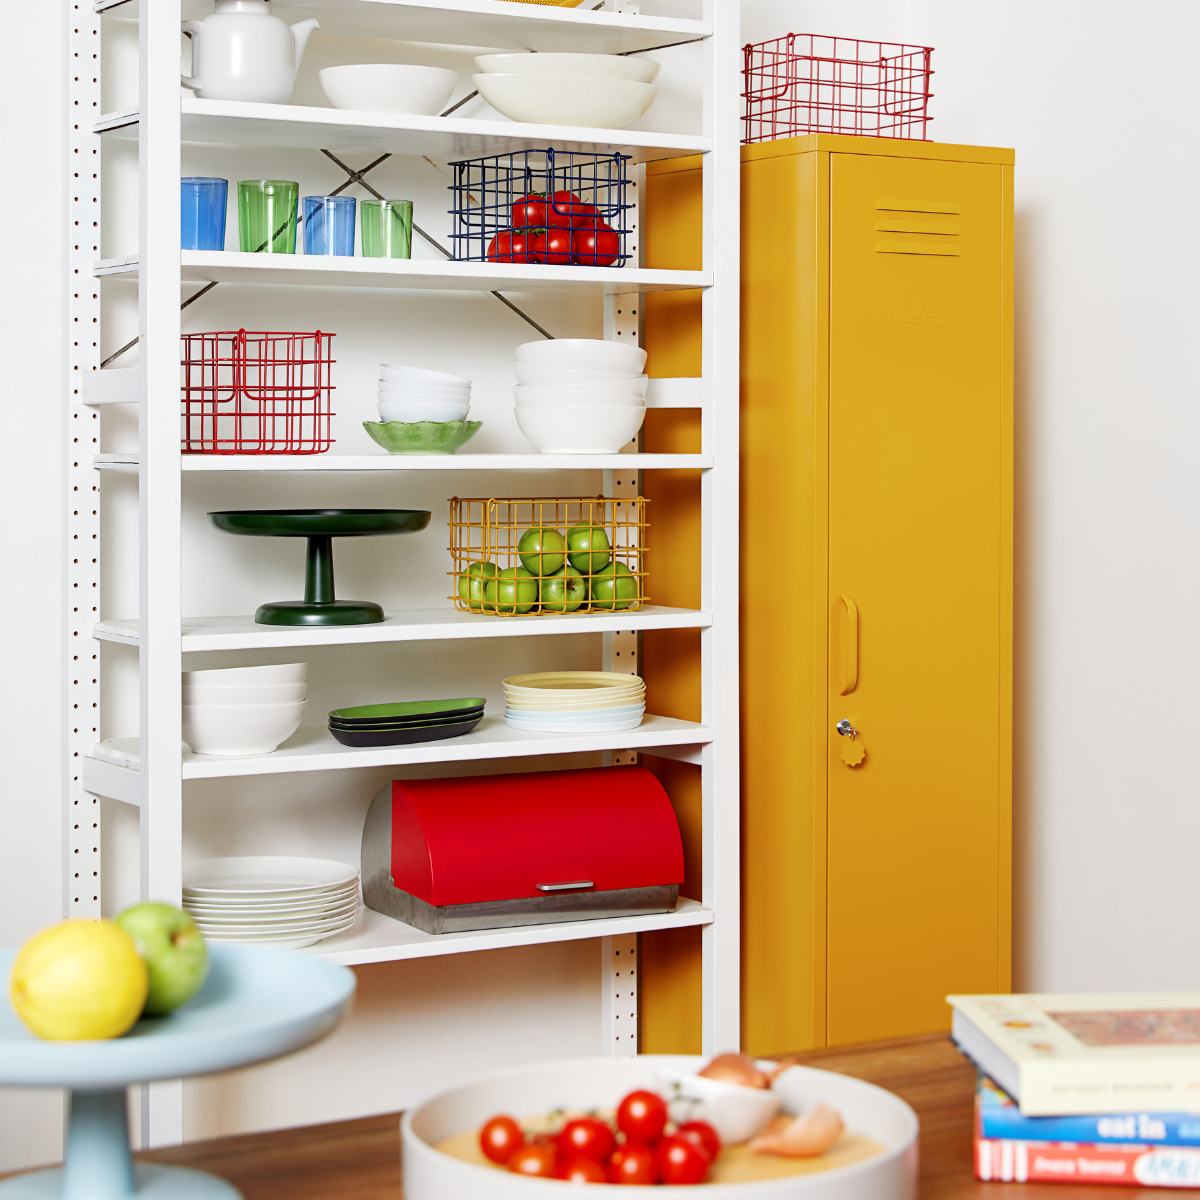 A set of open shelving in the kitchen displays crockery and glassware in primary colours. There is a mustard yellow locker in the corner and brightly coloured baskets display fruit and vegetables arranged by colour.